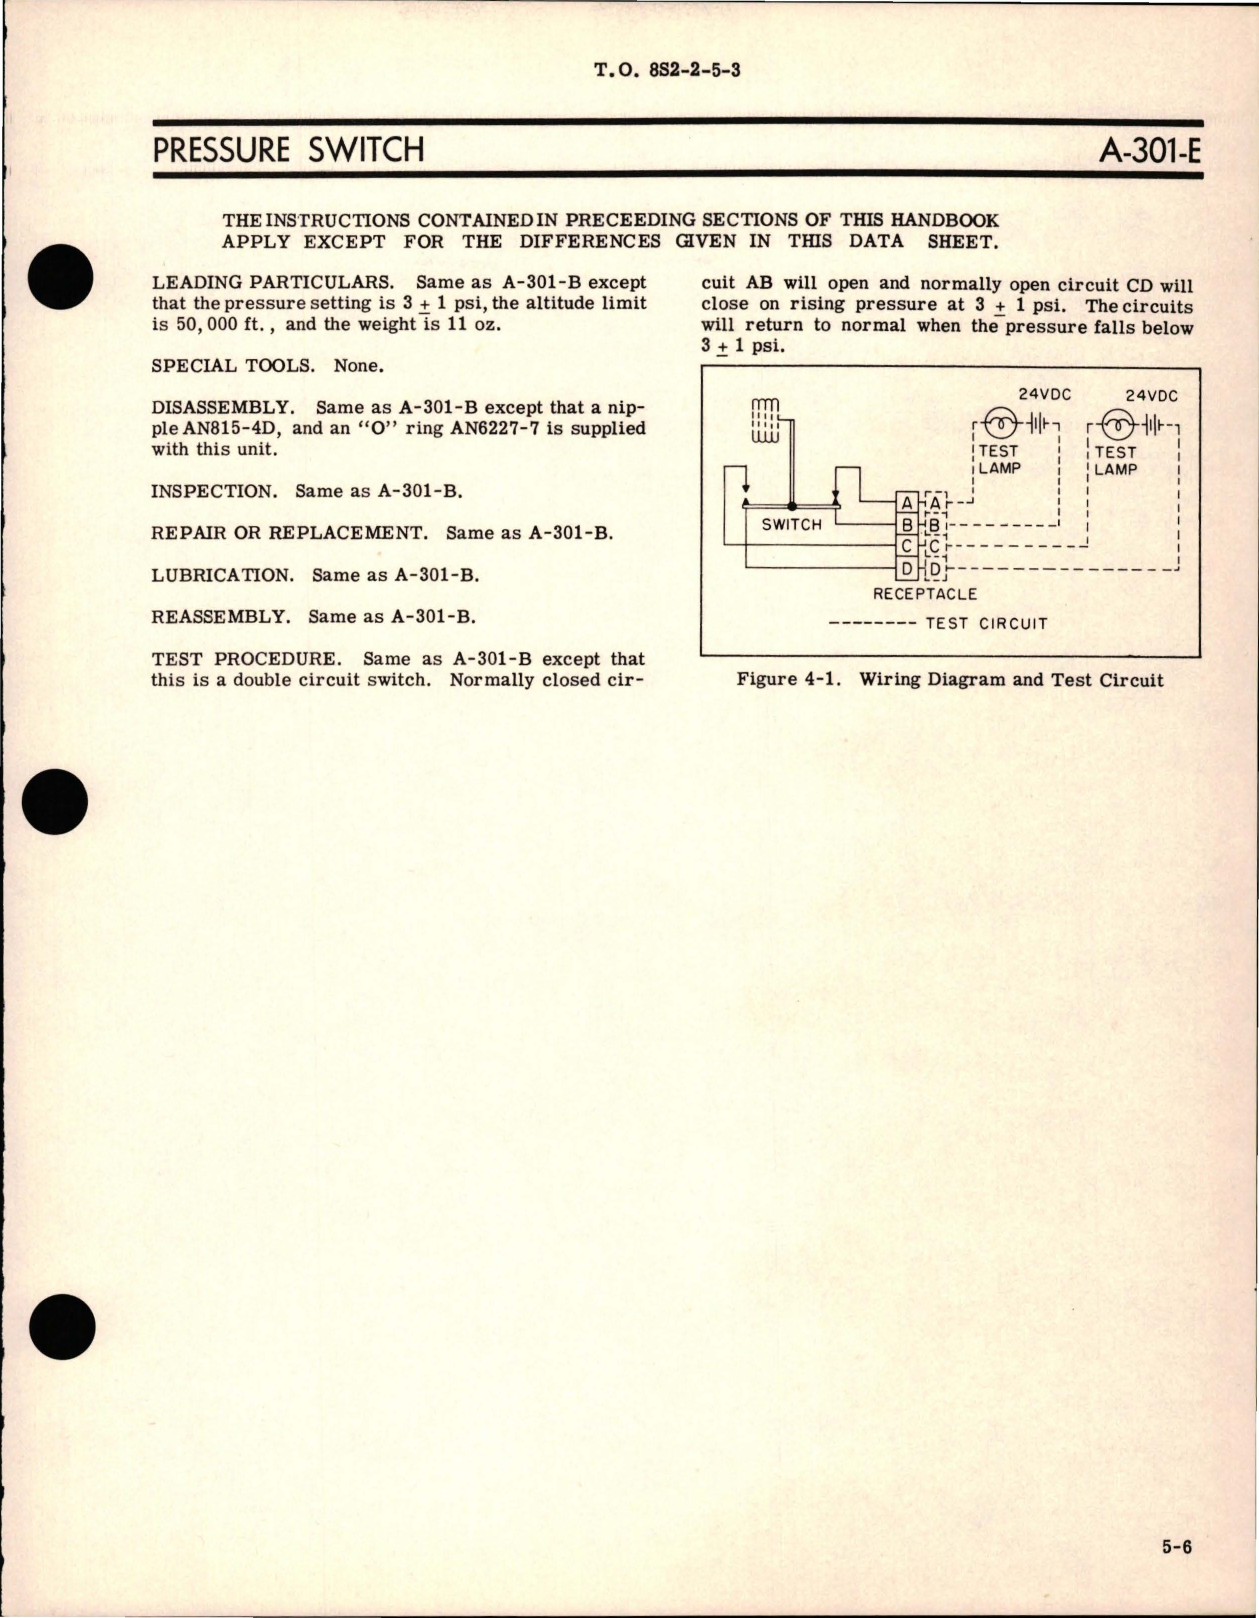 Sample page 7 from AirCorps Library document: Overhaul Instructions for Pressure Switches 